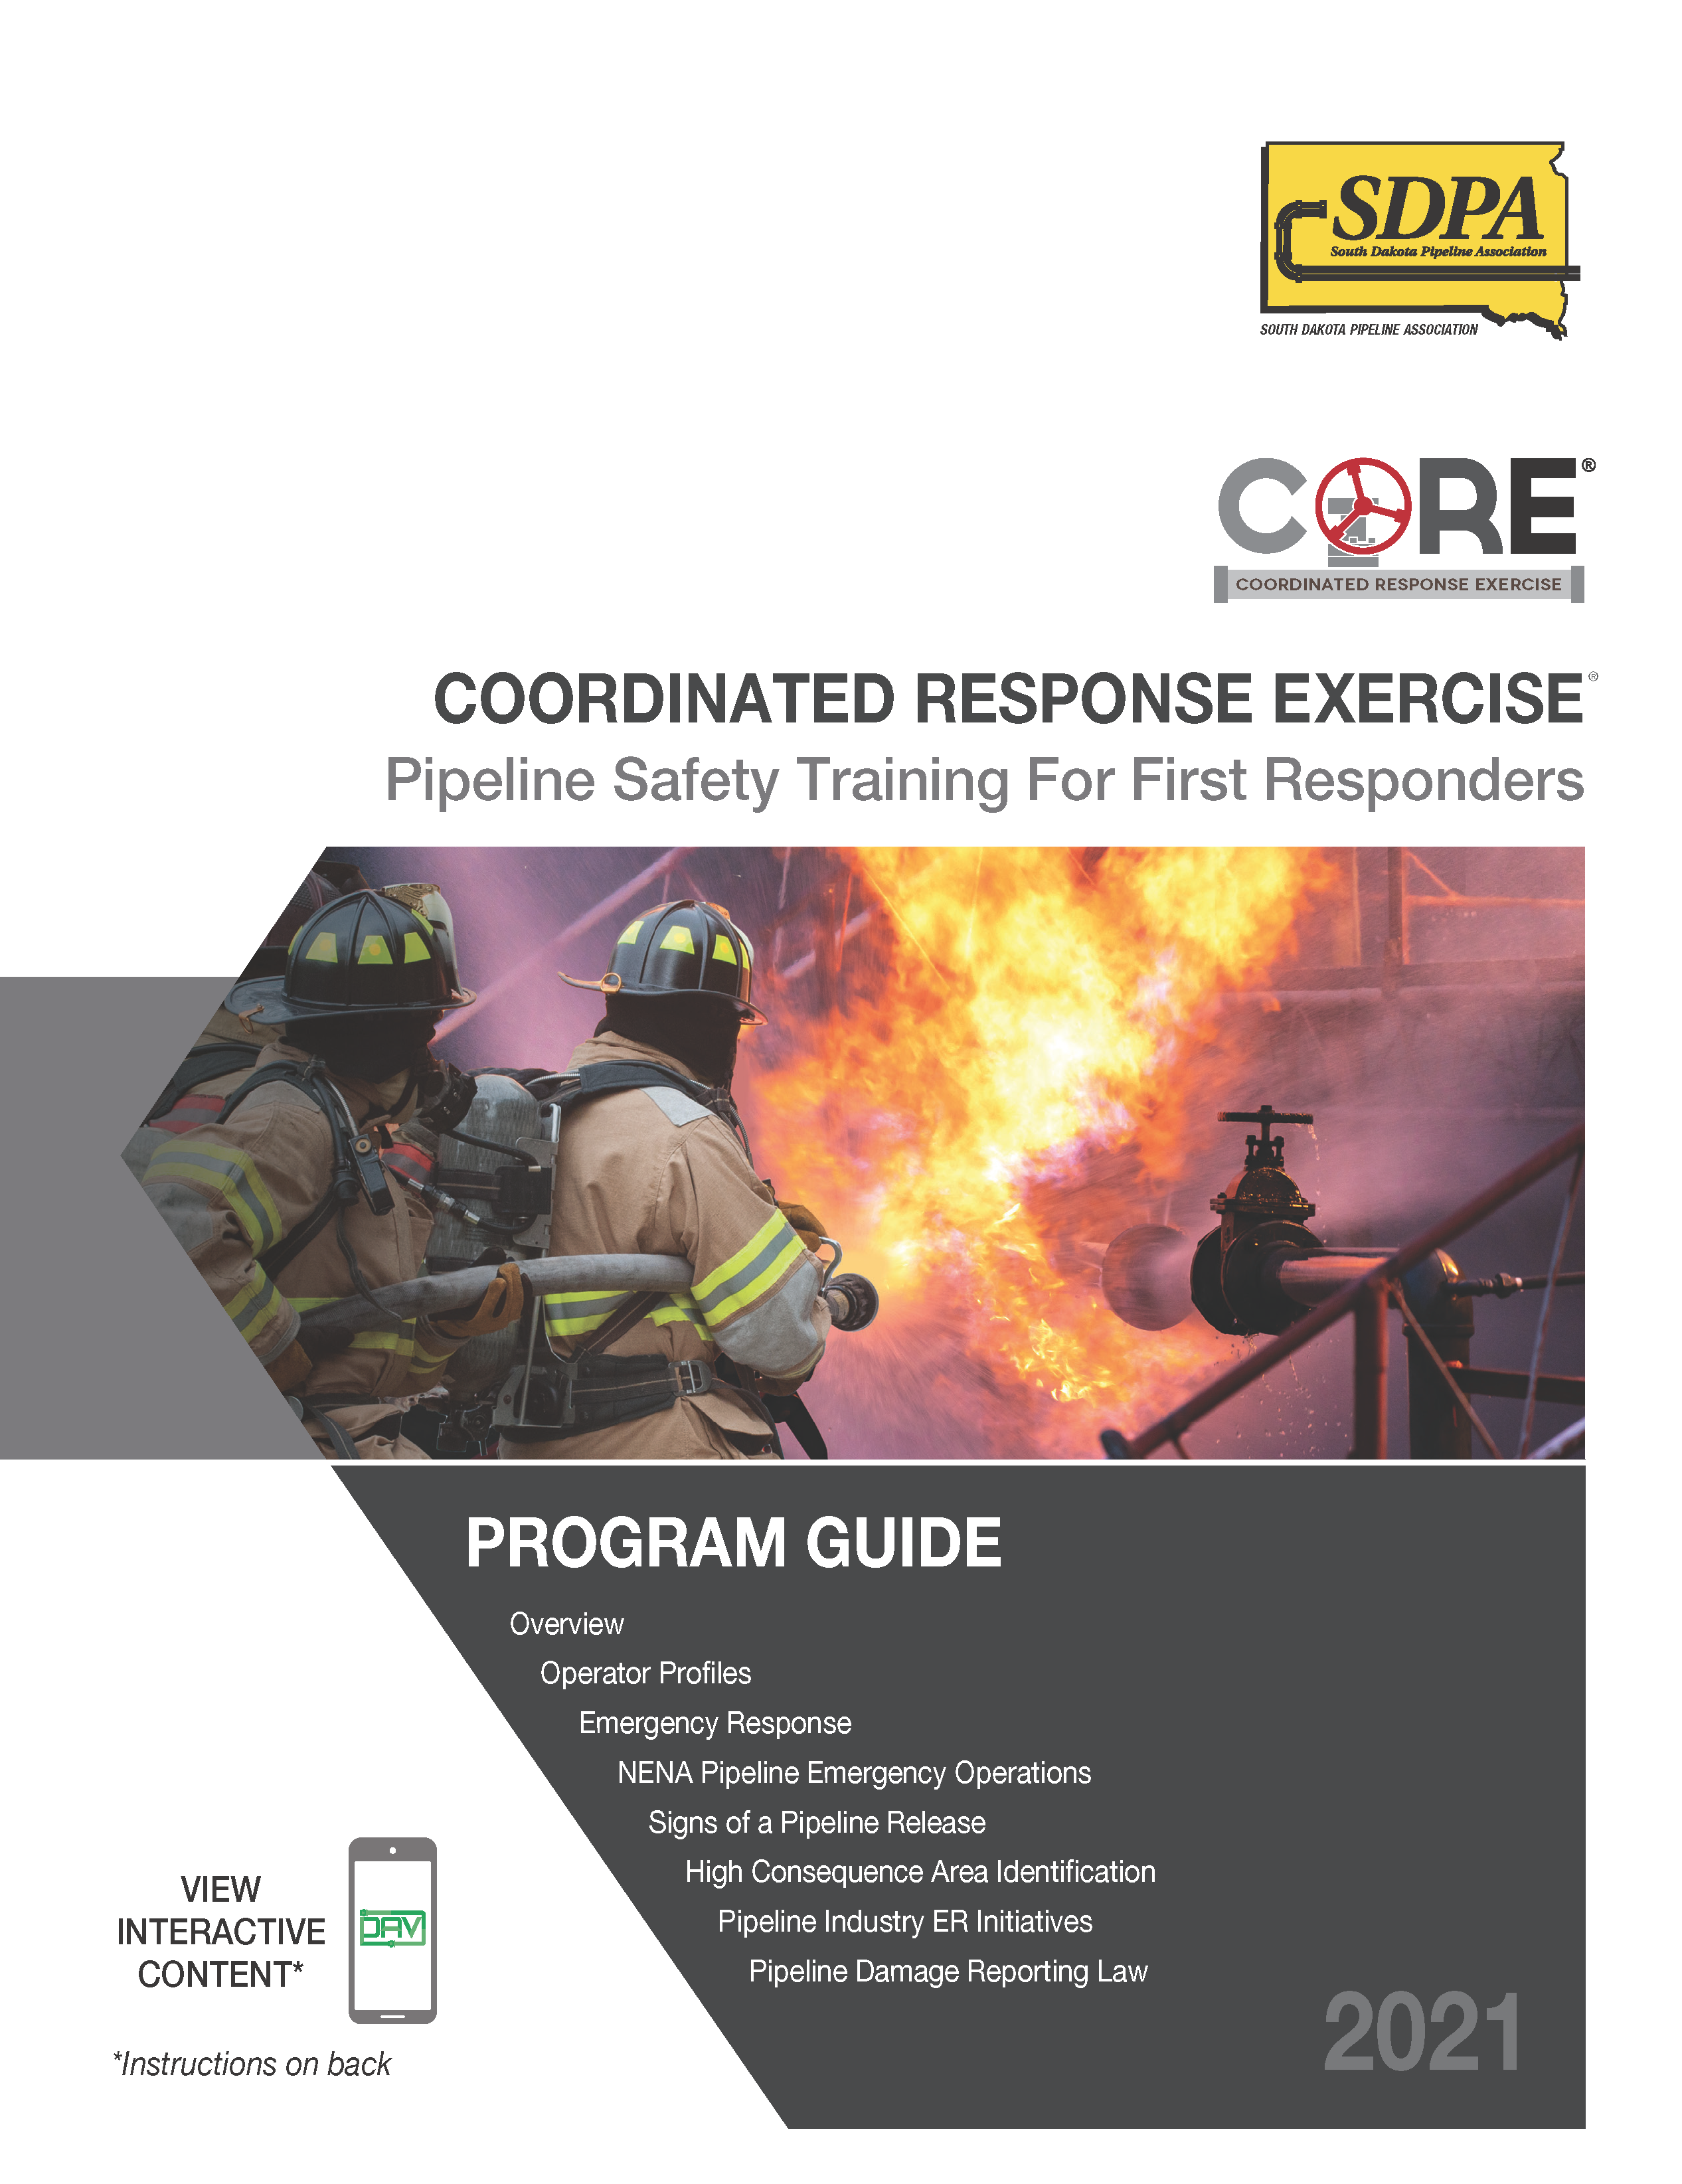 Download the 2021 SDPA Emergency Response Training Materials